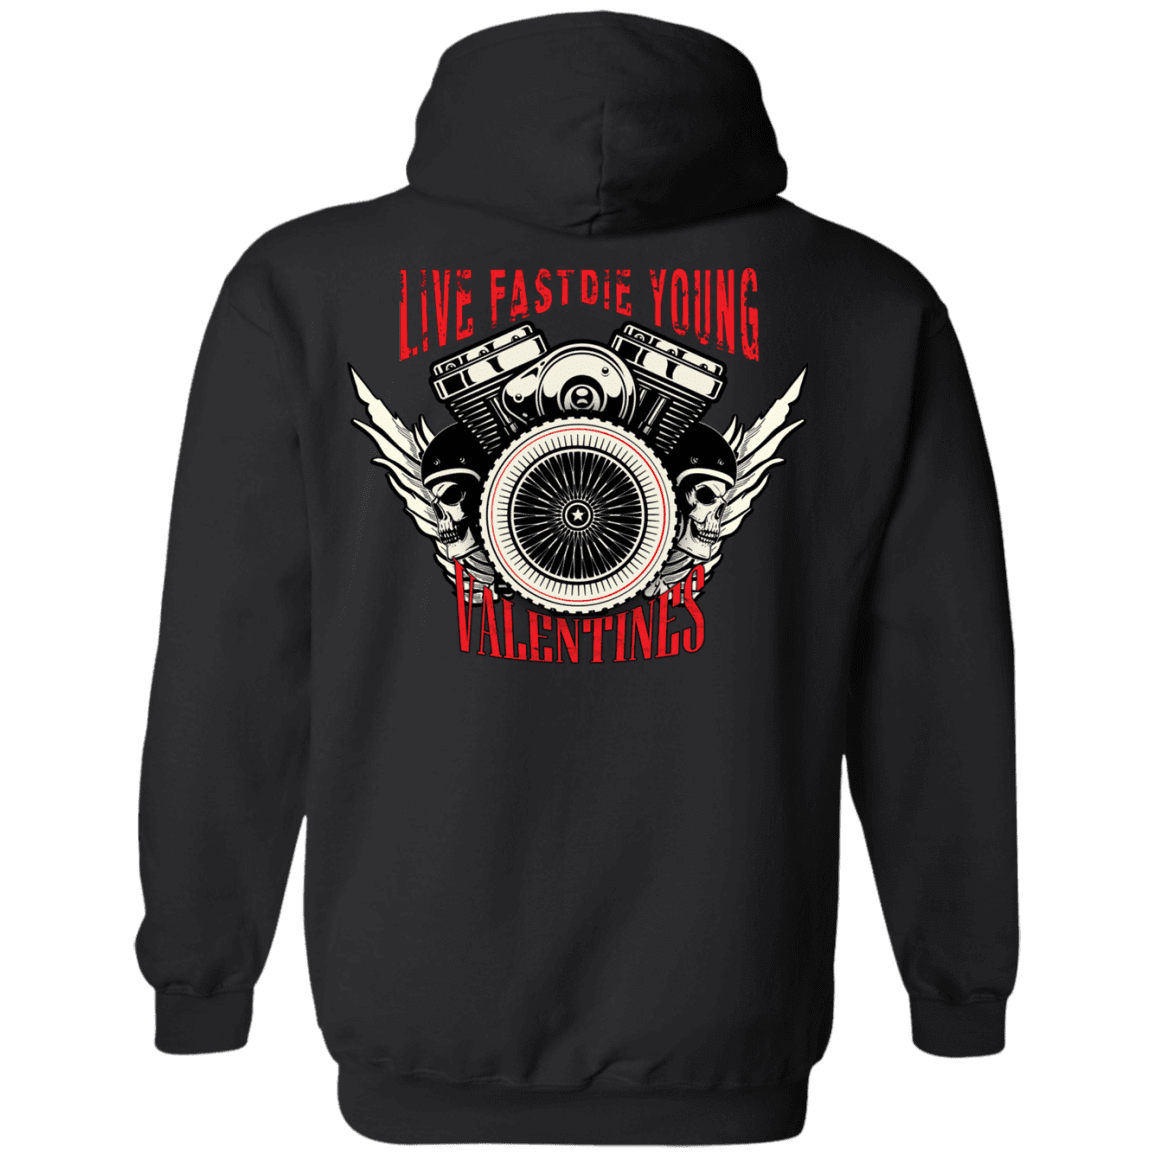 Live Fast, Die Young T-Shirt & Hoodies - American Legend Rider